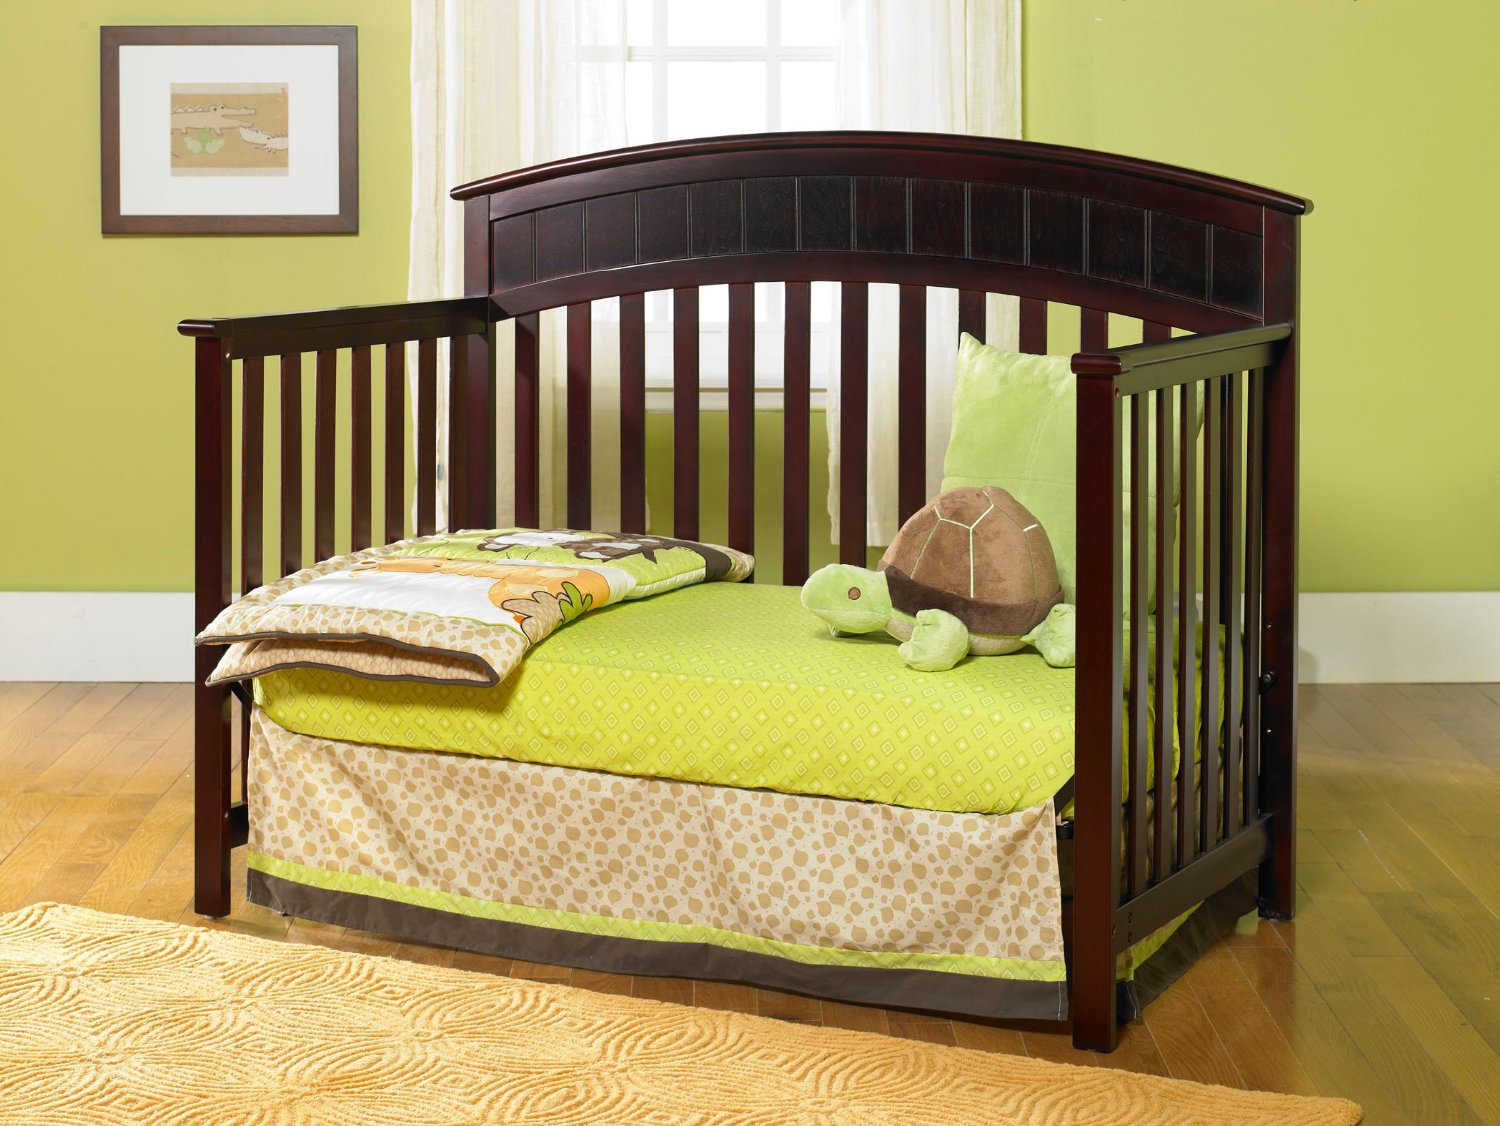 Top Rated Cribs: 7 Best Baby Cribs That All Mothers Love ...